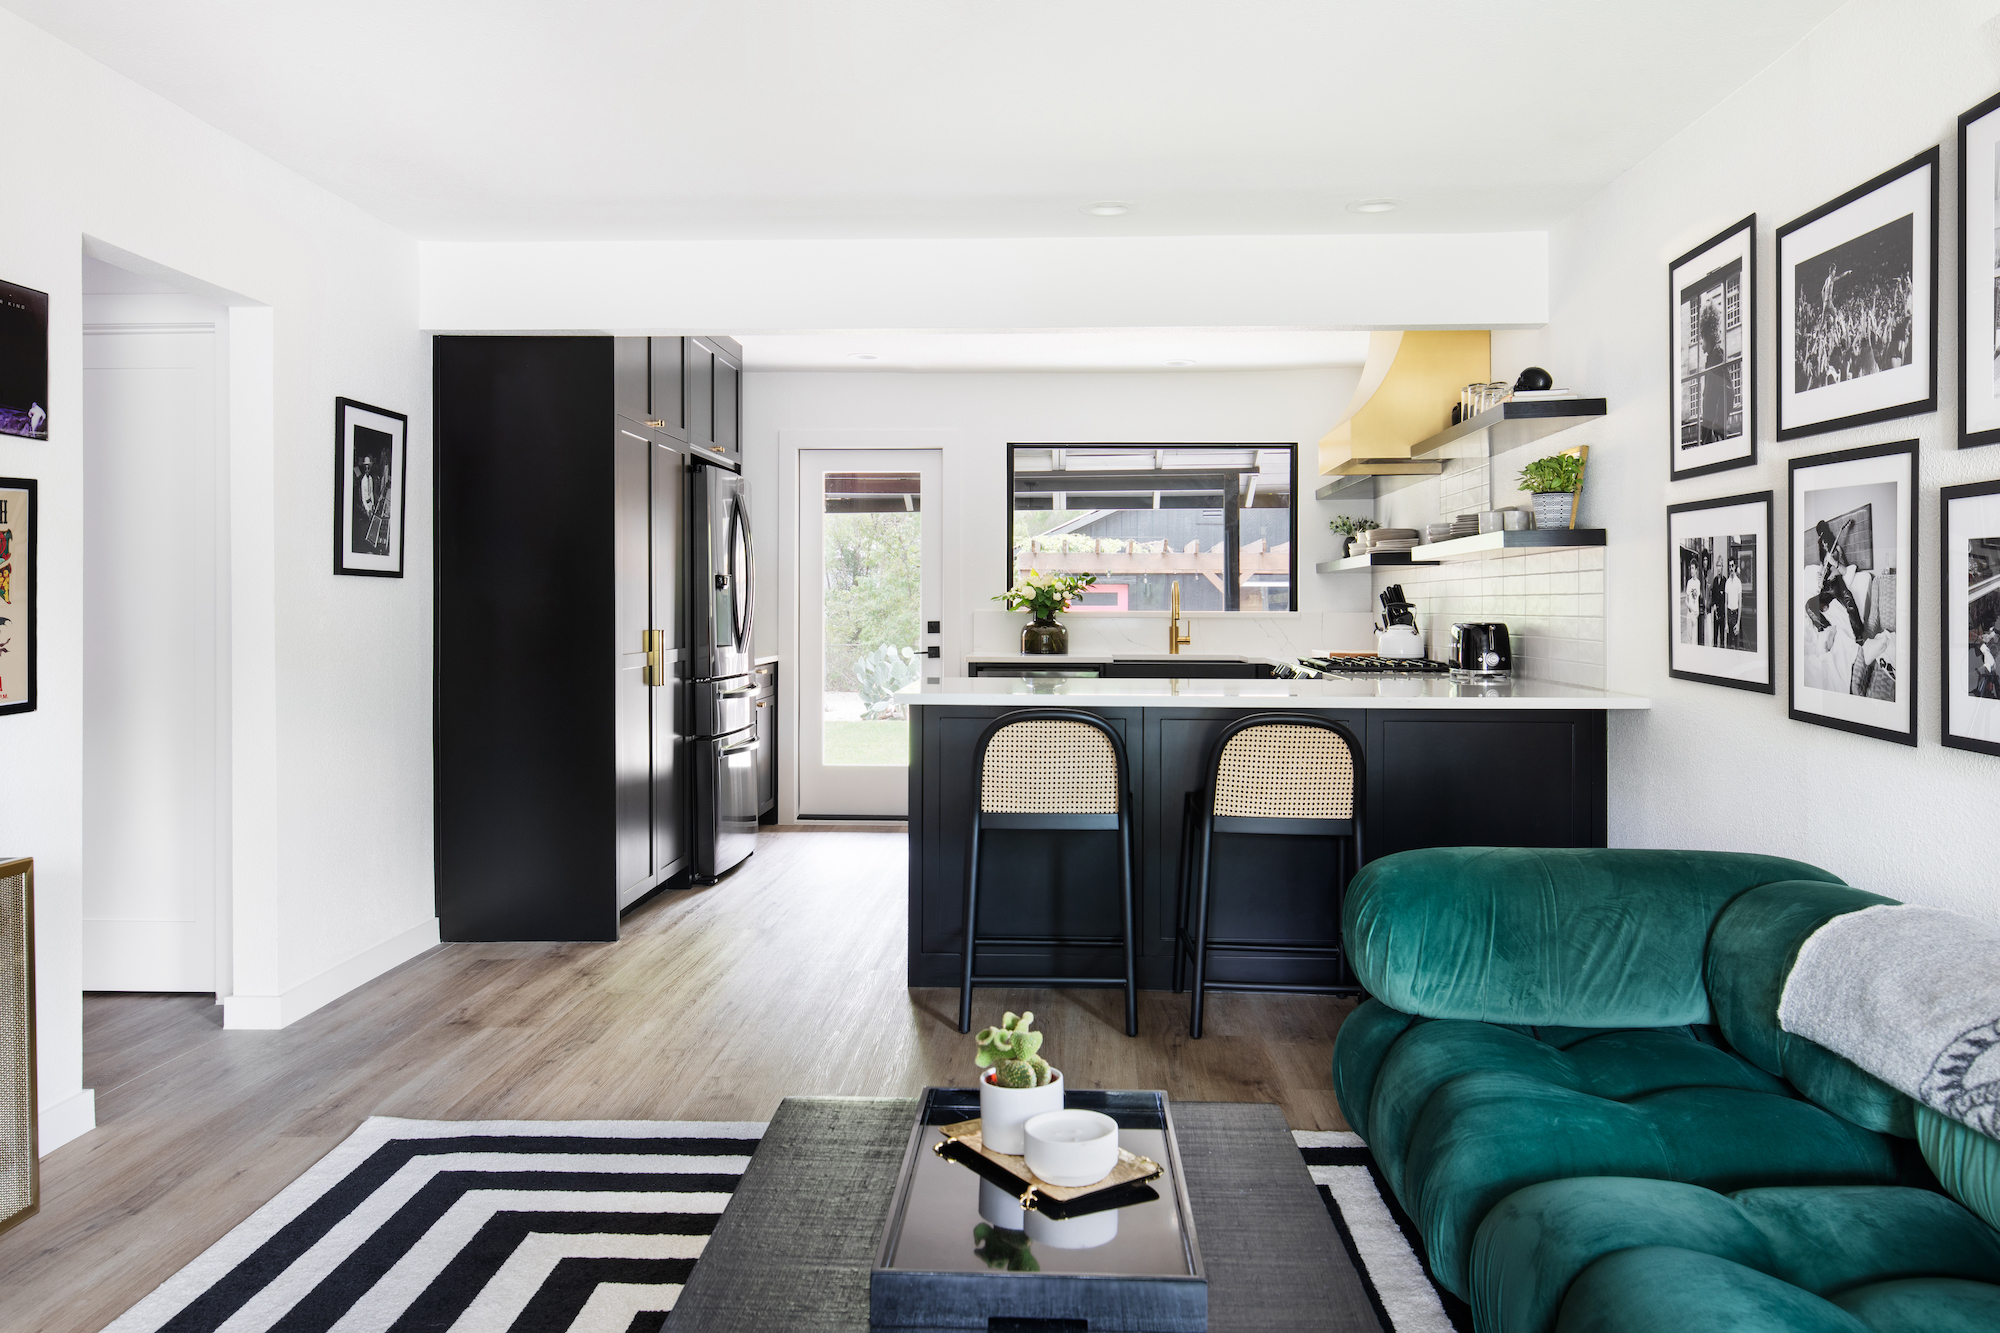 great room with teal sofa and dark cabinets in kitchen